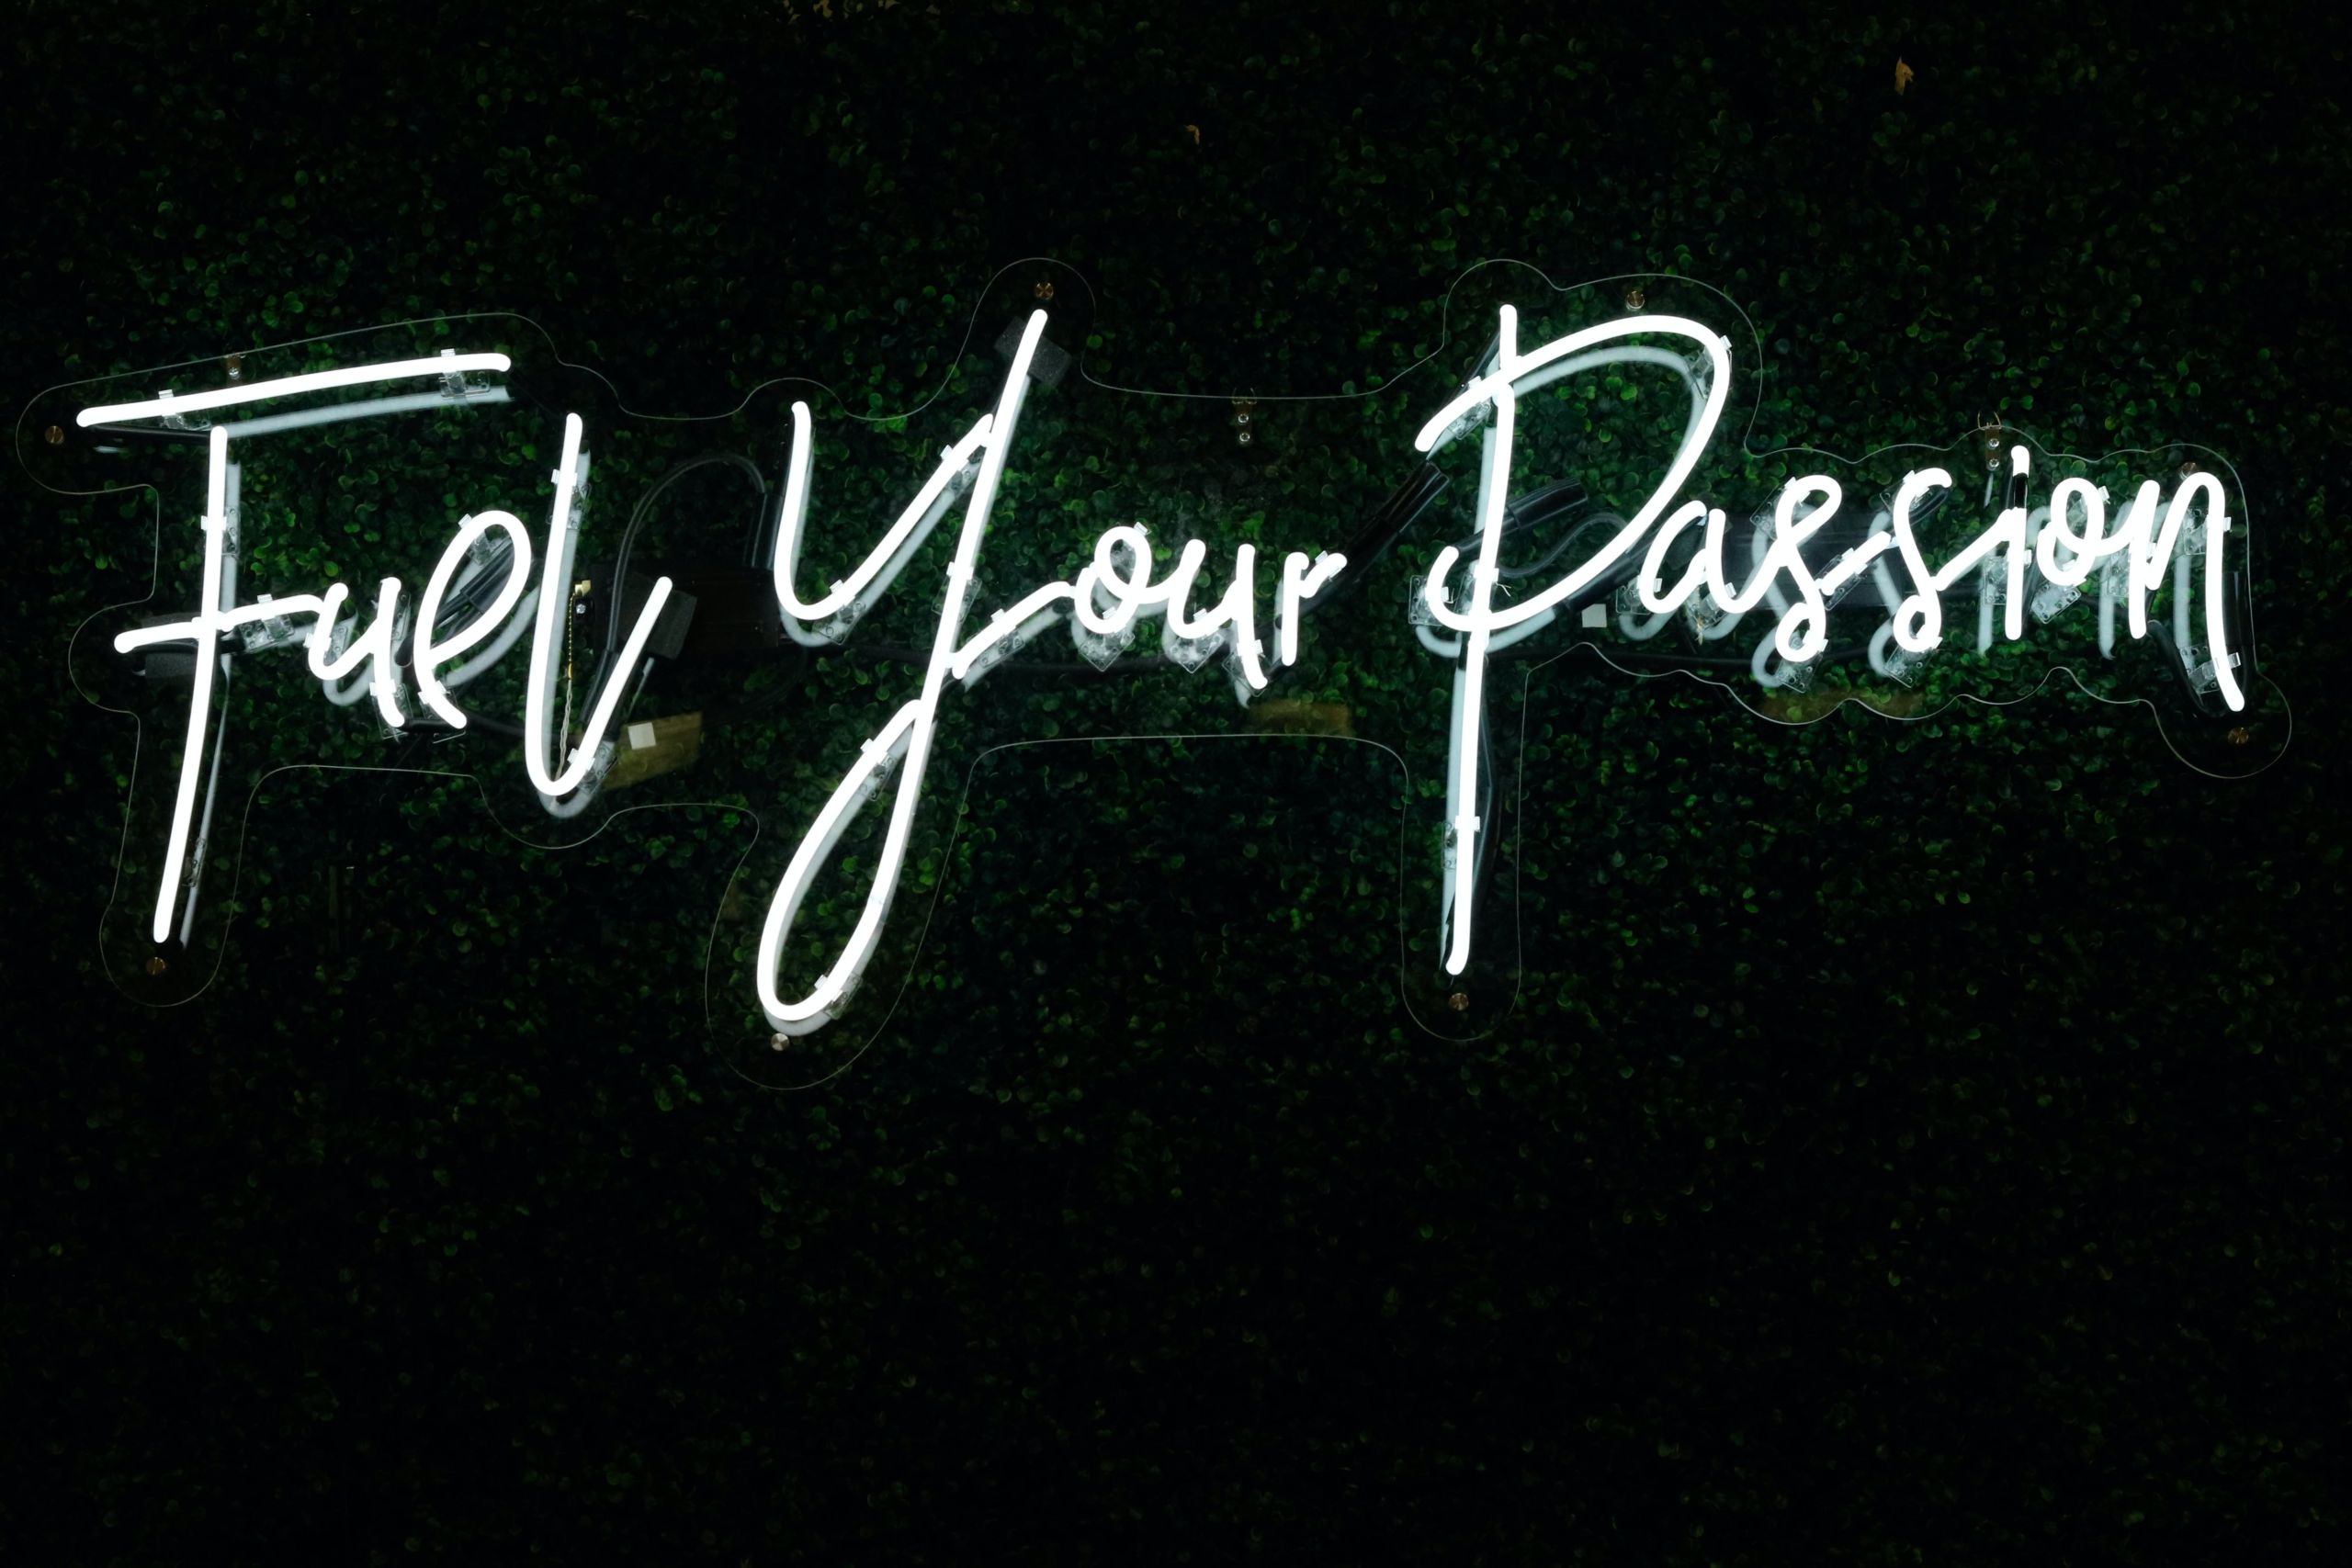 A neon sign reads "Fuel your Passion."